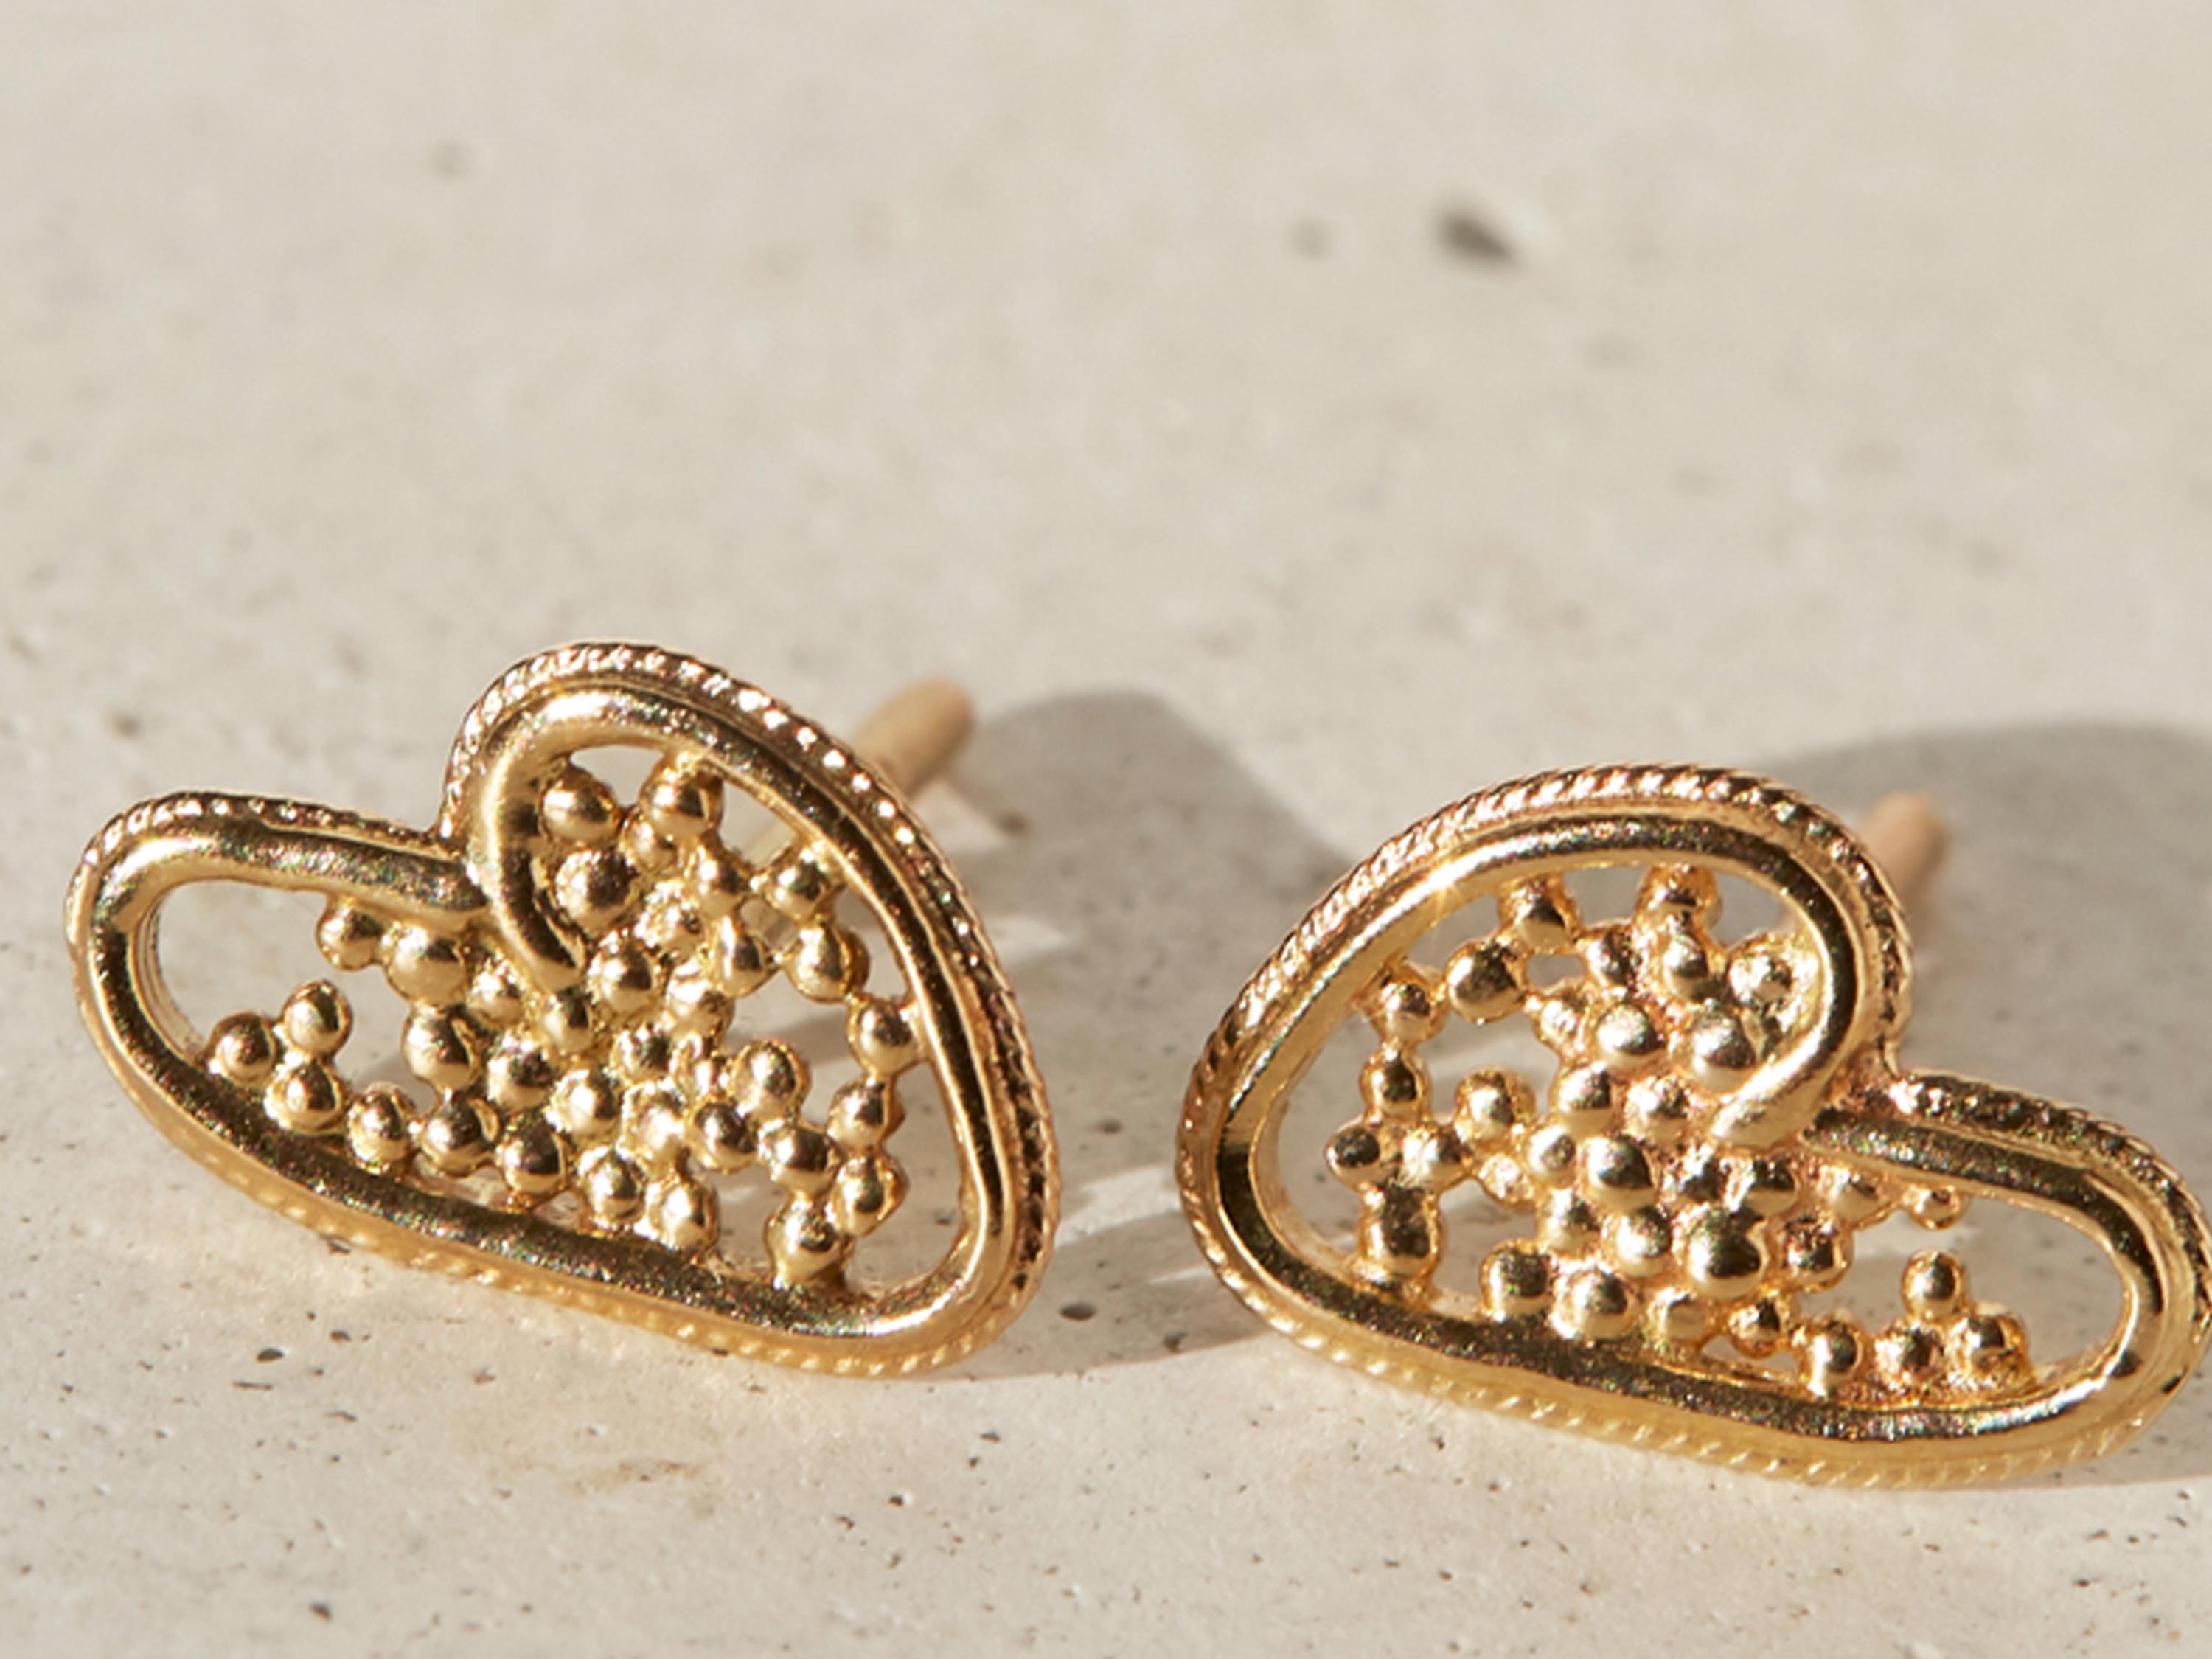 Ame 14 Karat Gold Heart Studs by Mon Pilar

Asymmetrical heart earrings featuring miniature granules of gold. Can be worn as a matching set with our Ame Necklace.
Available in 14 karat recycled yellow gold.
Dimensions: 8mm X 10mm
Post back,